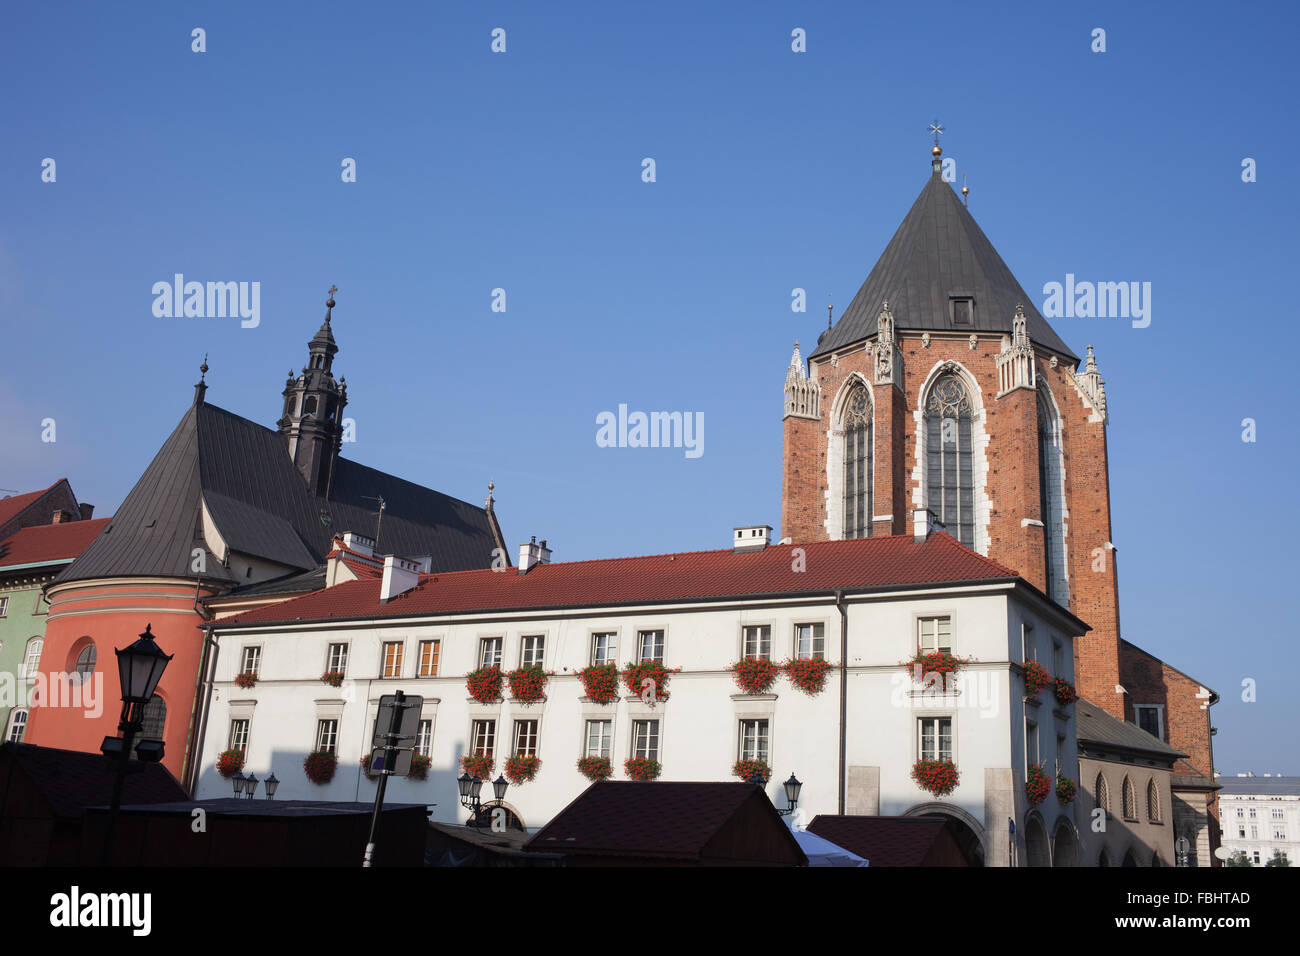 Poland, Krakow, Old Town, presbytery building on Small Market Square, St. Mary's Basilica in the background Stock Photo